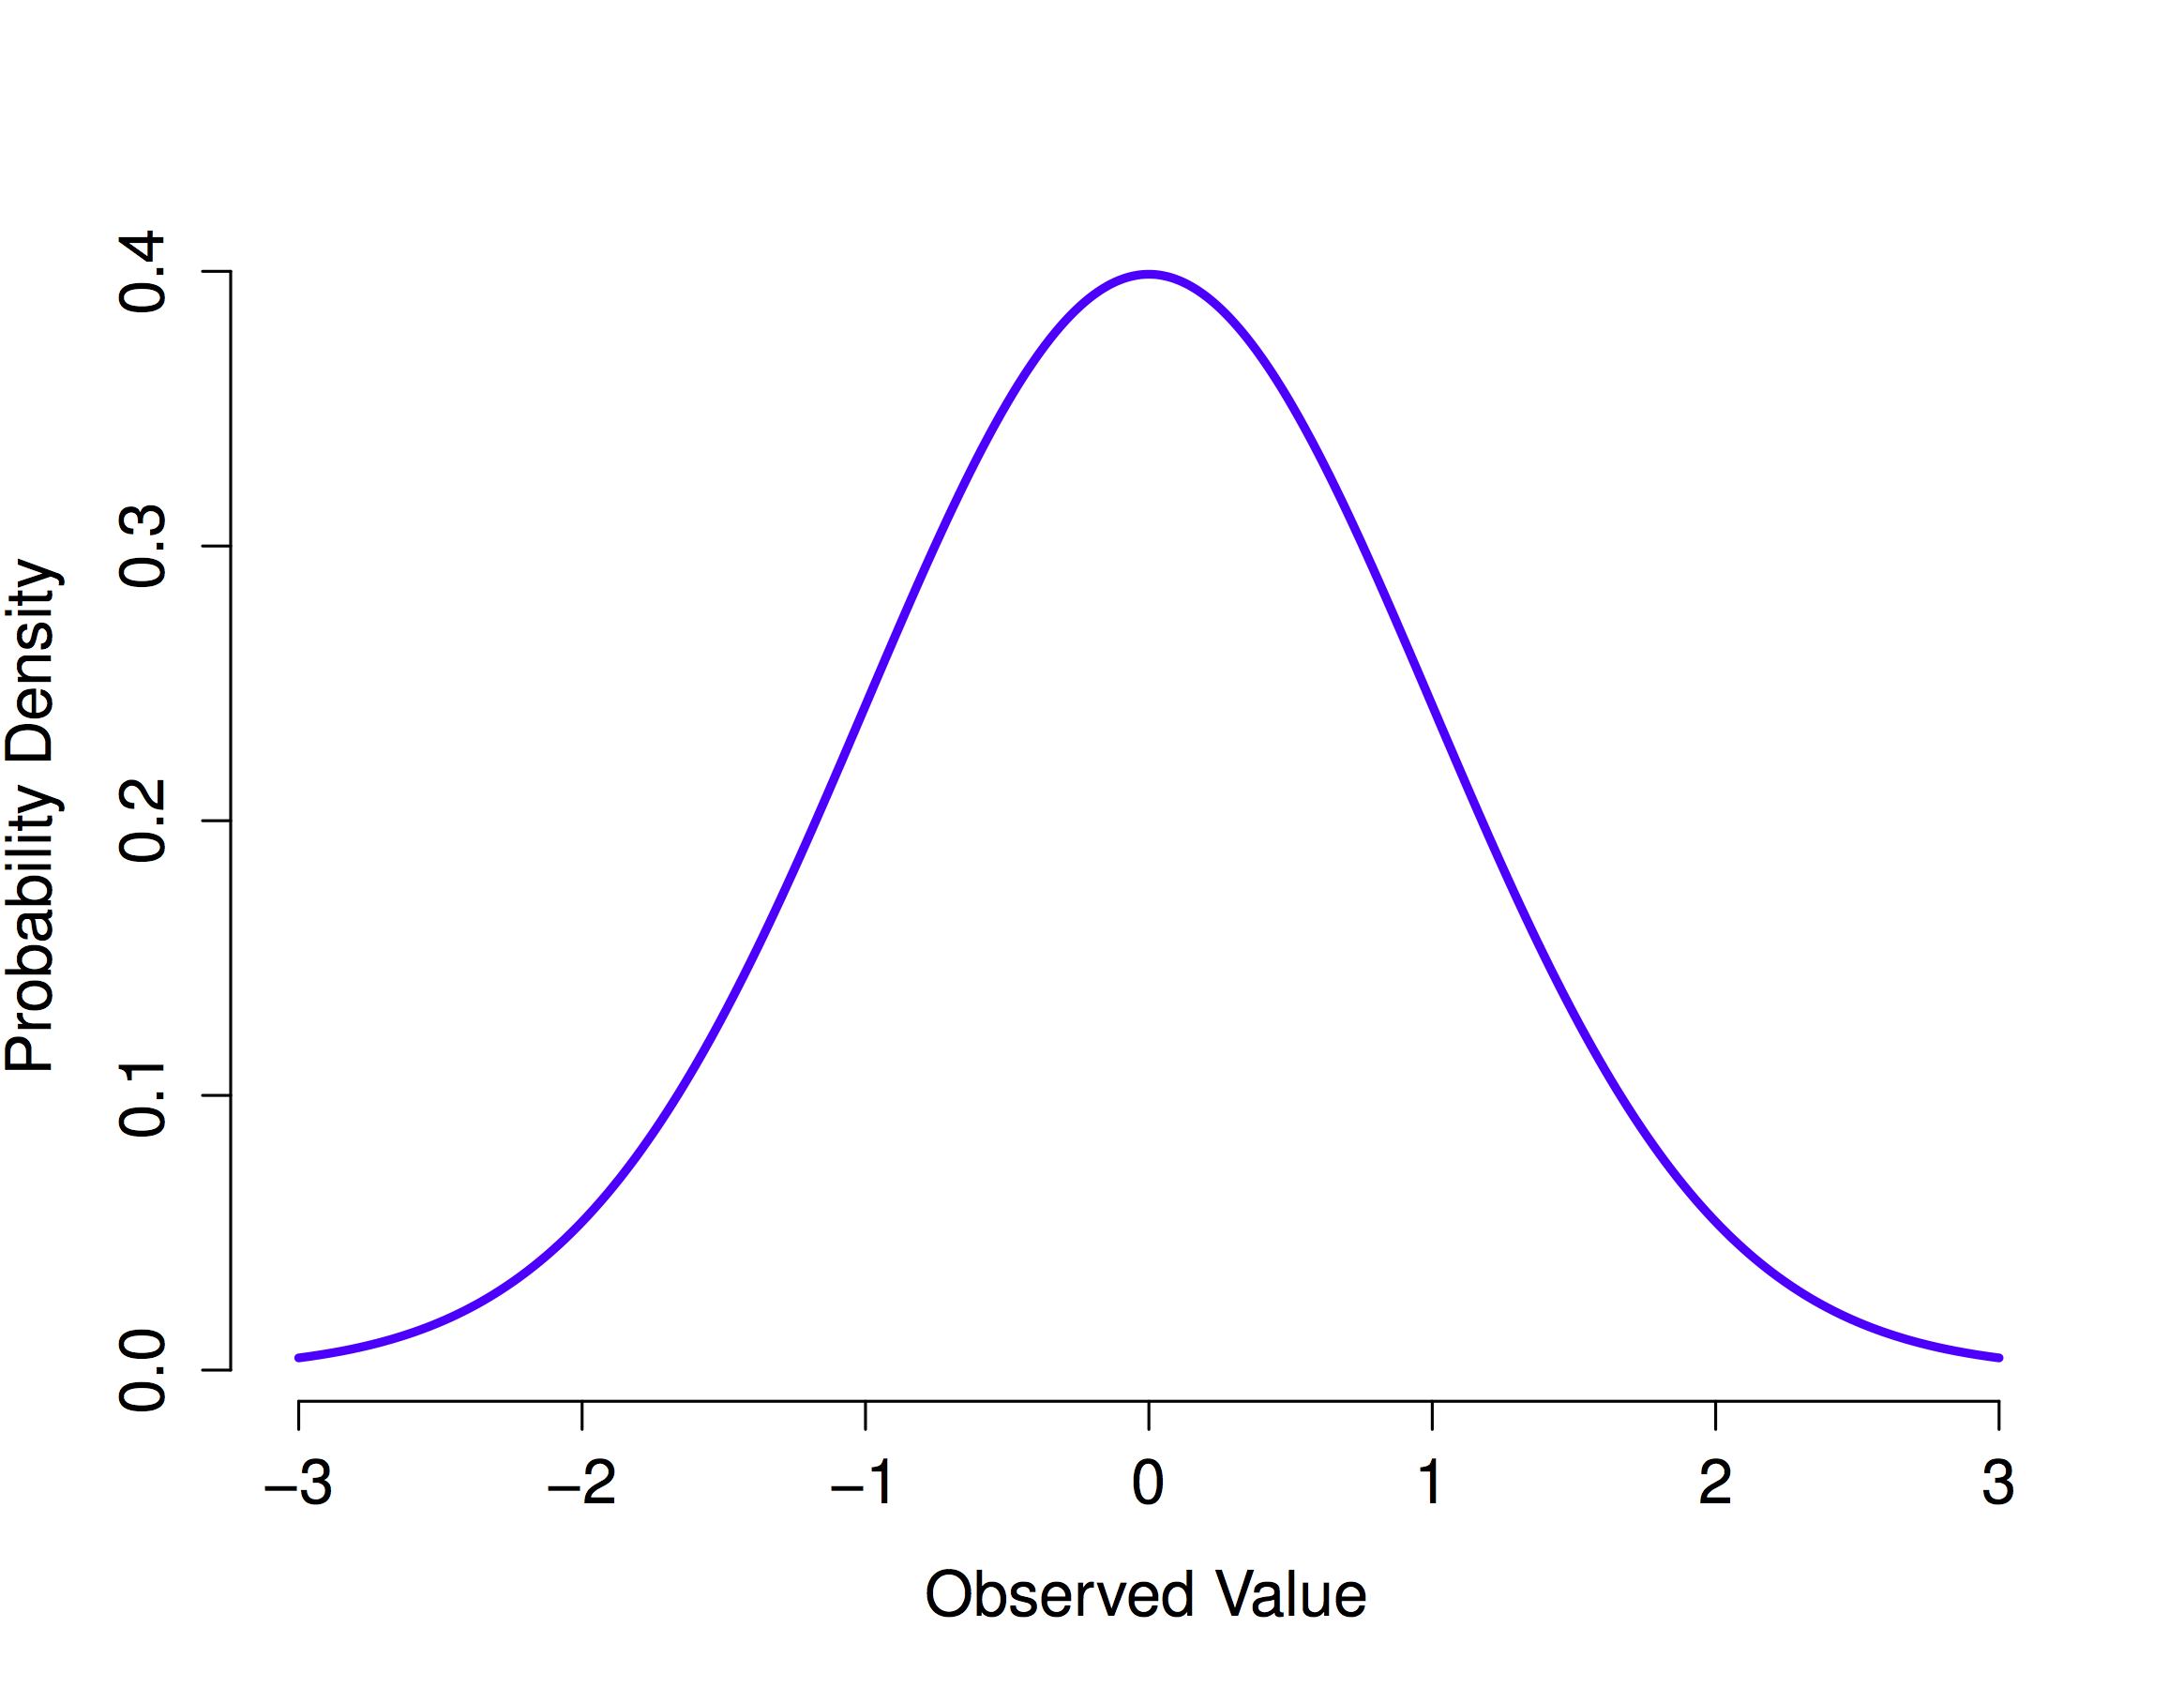 The normal distribution with mean = 0 and standard deviation = 1.